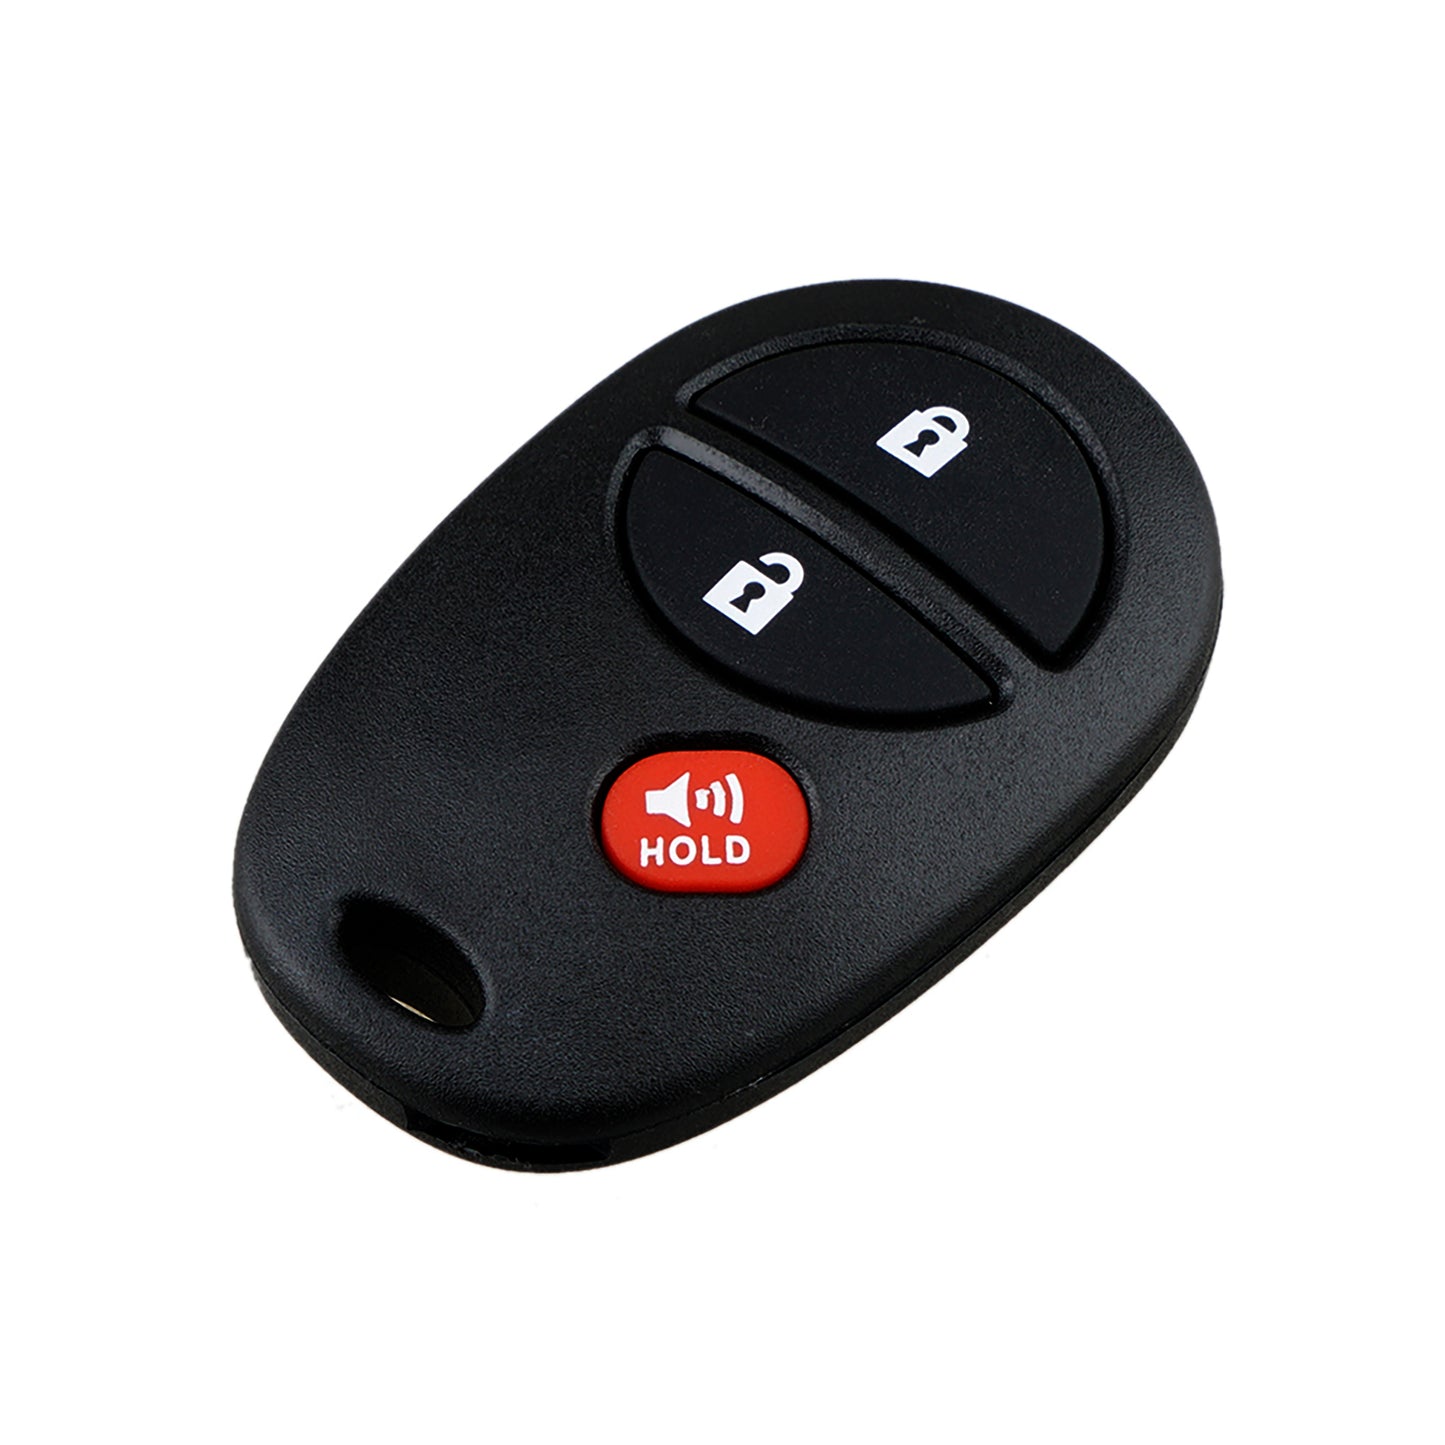 3 Buttons 315MHz Car Keyless Entry Fob Remote Key For 2004-2016 Toyota Tacoma Sienna Sequoia Tacoma GQ43VT20T SKU : J071